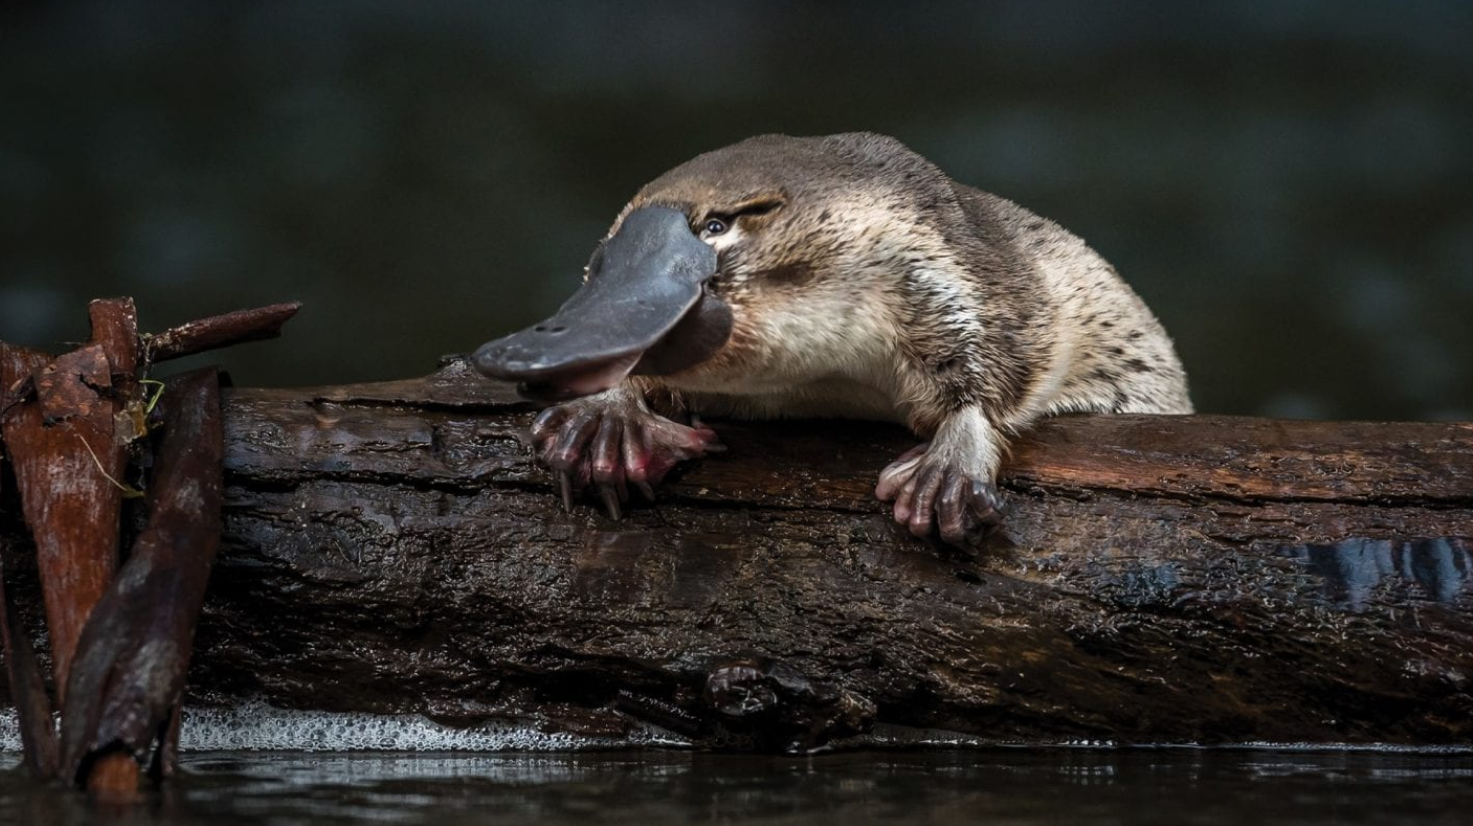 GSLN joins the NSW Platypus and Turtle Alliance